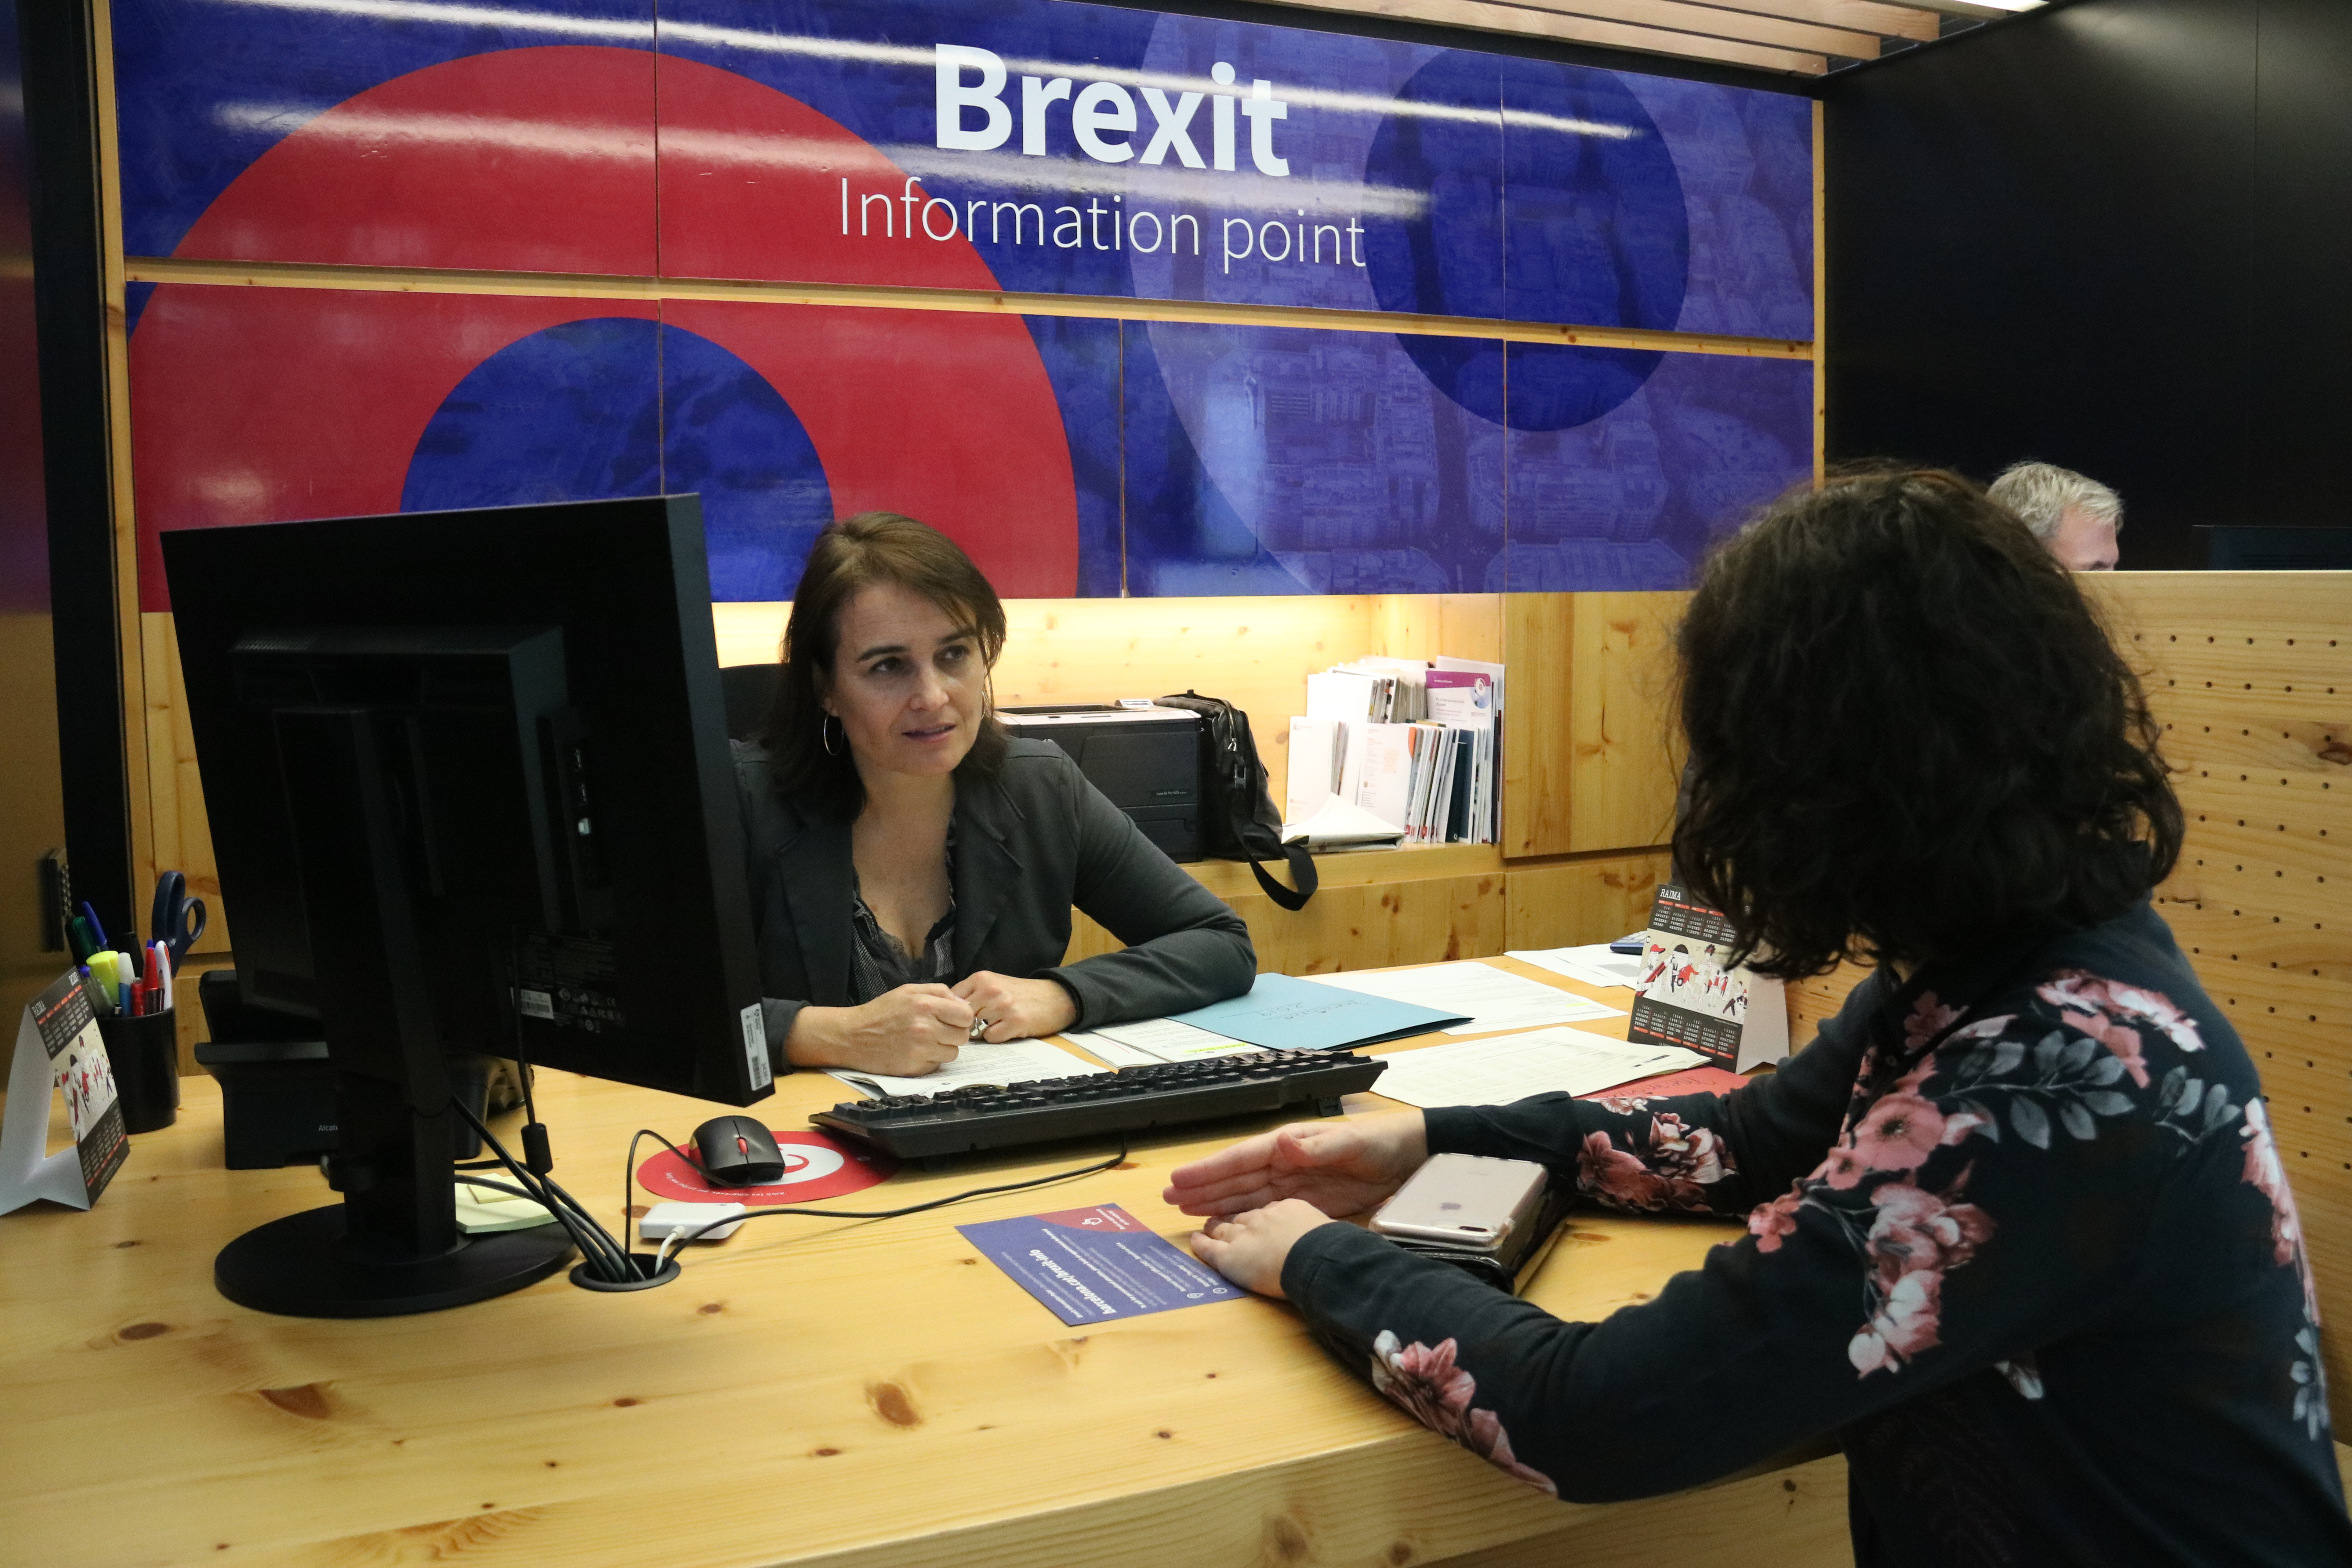 Brexit Information Point, run by Barcelona City Council and Barcelona Activa